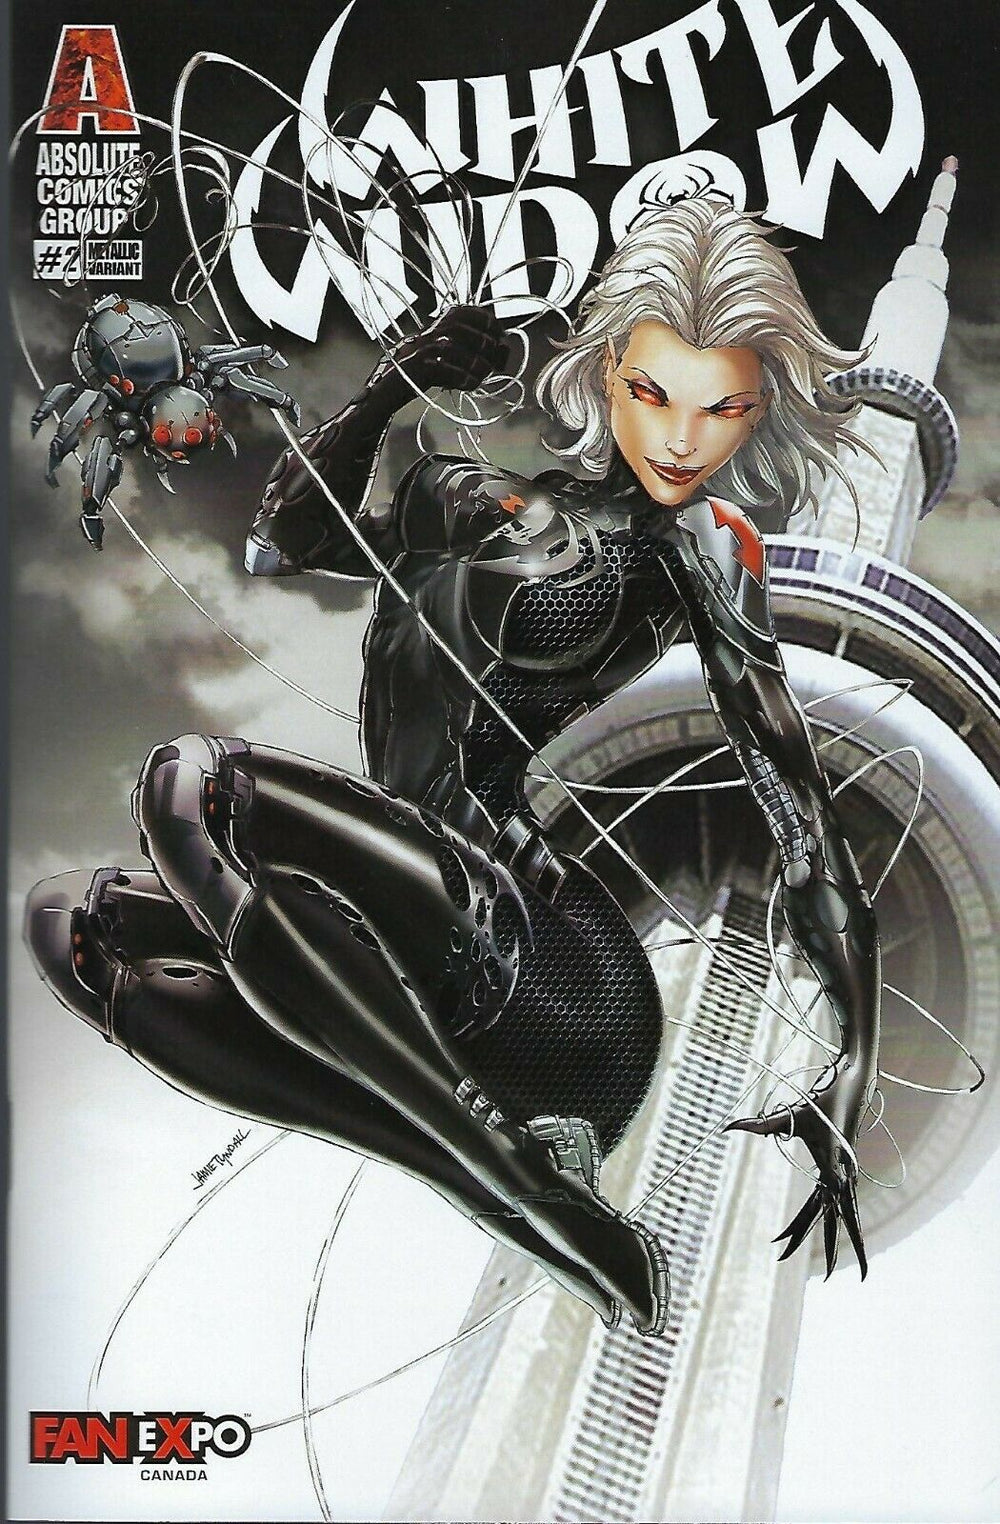 White Widow #2 Jamie Tyndall Fan Expo Canada Variant Cover